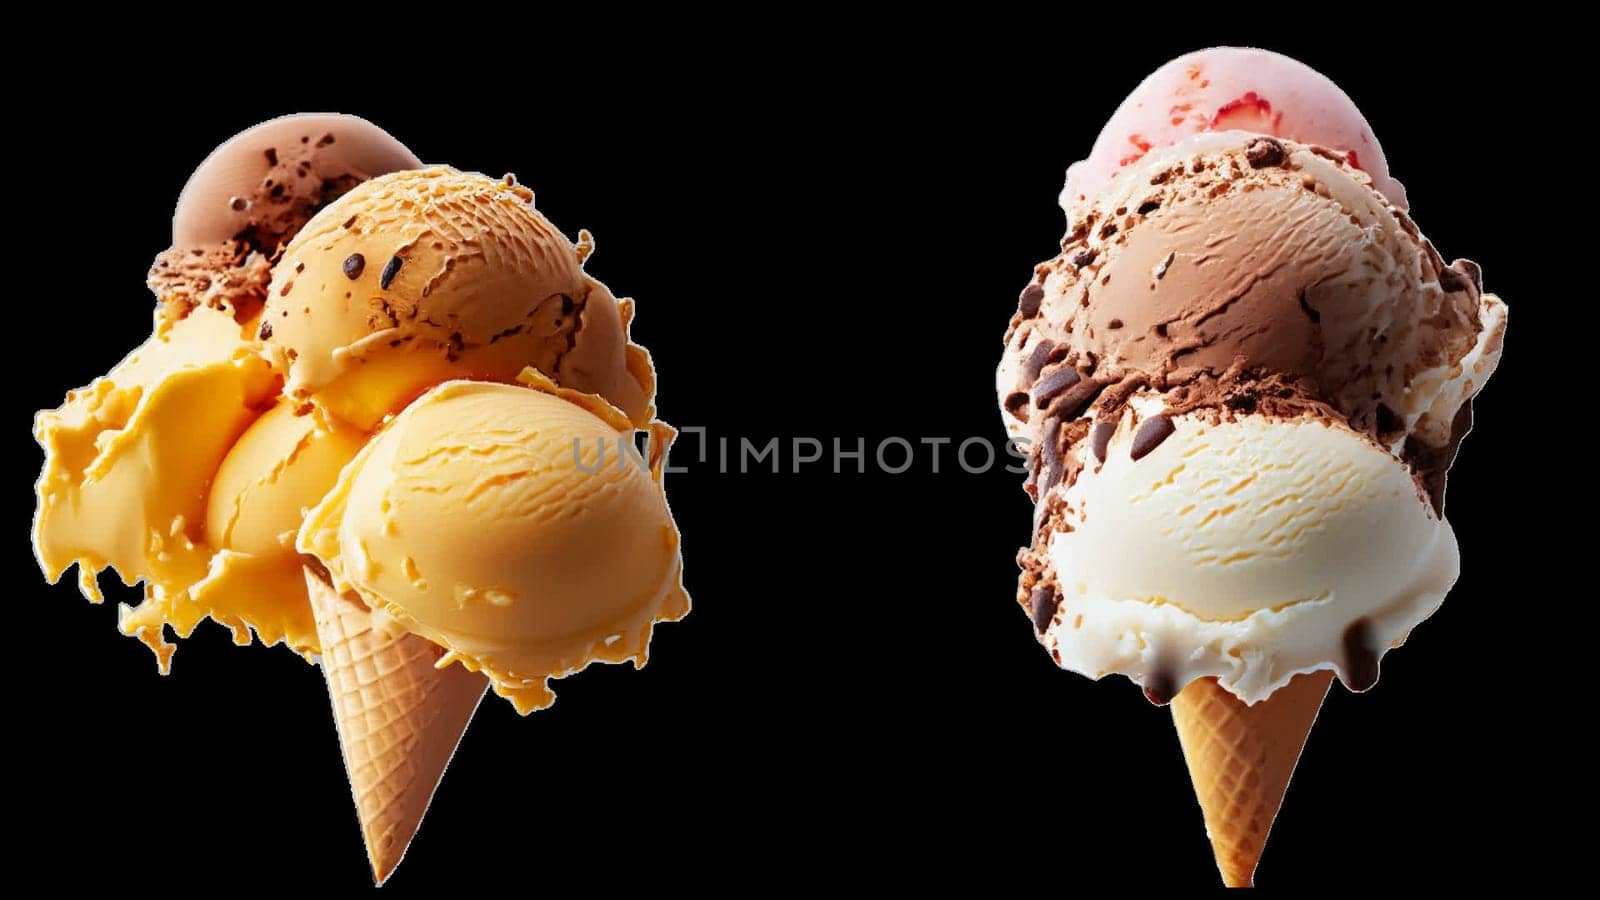 explosion of Ice Cream. Summer time. 3D illustration, 3D rendering. futuristic realistic 3d creative concept design, format png. High quality illustration